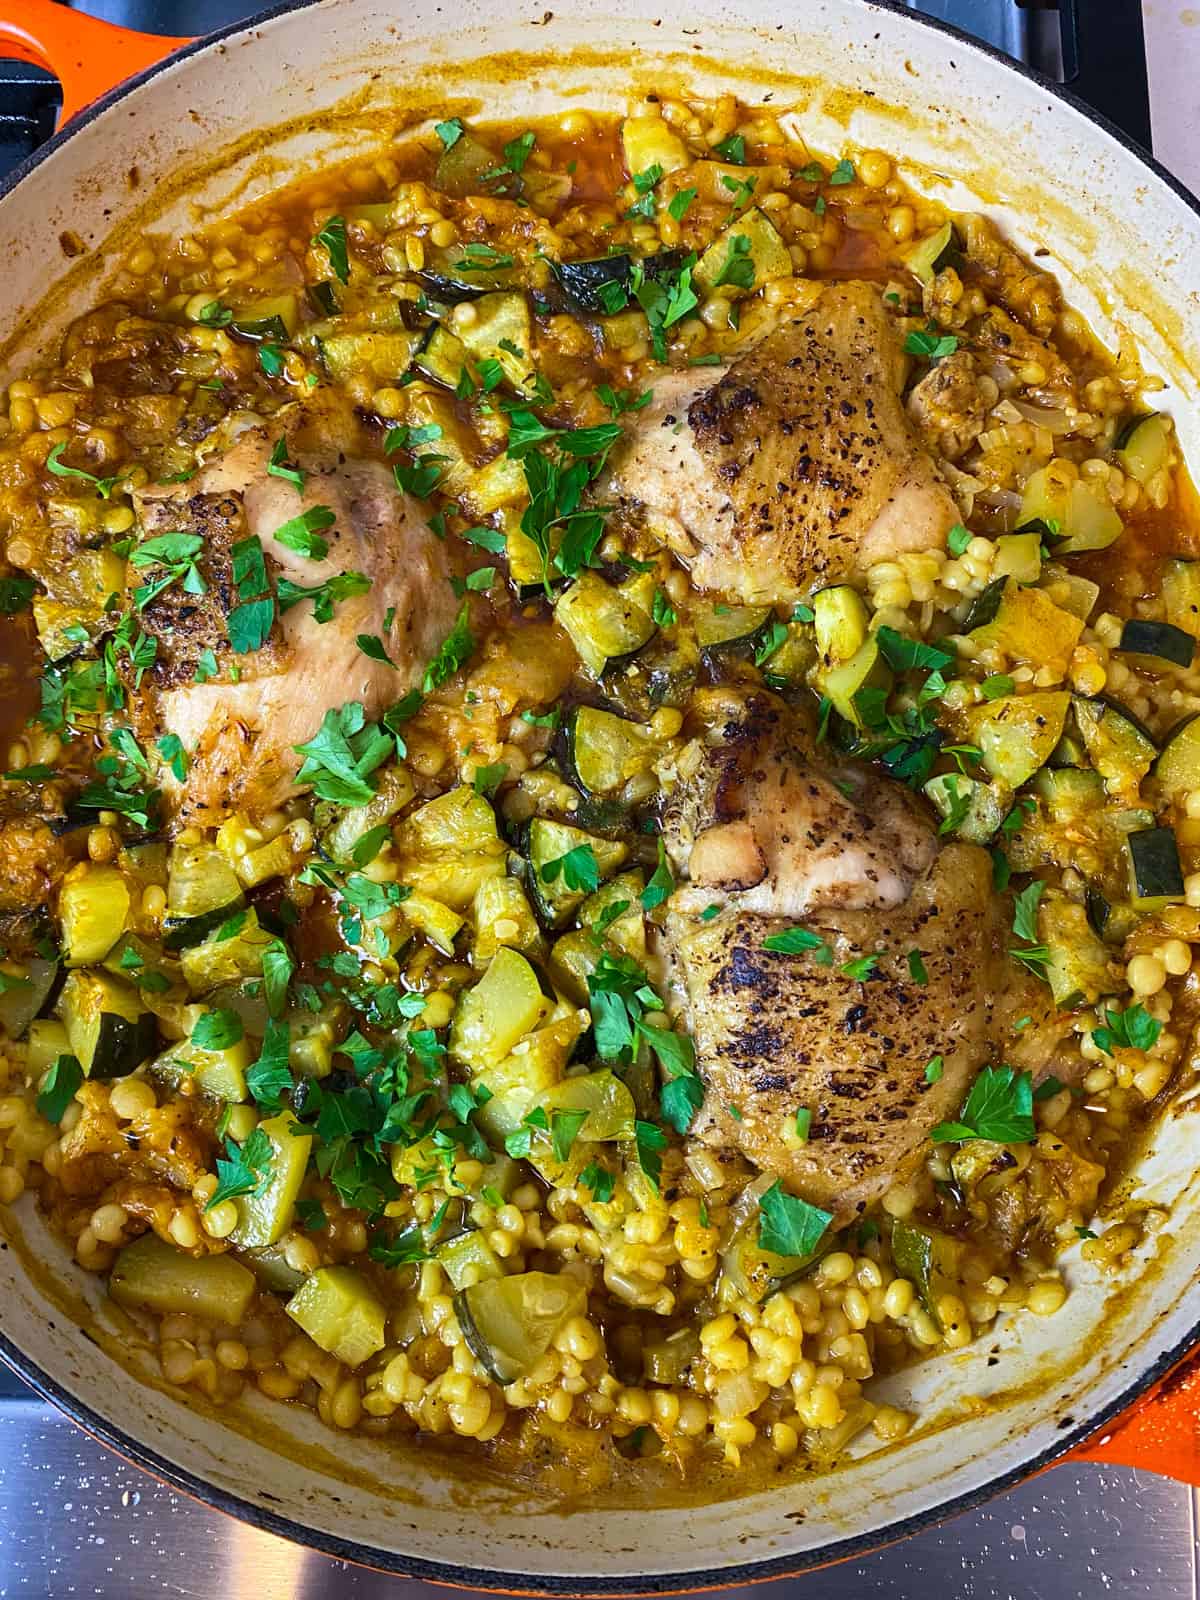 Bake the Israeli couscous and chicken until cooked through, then garnish with fresh parsley.